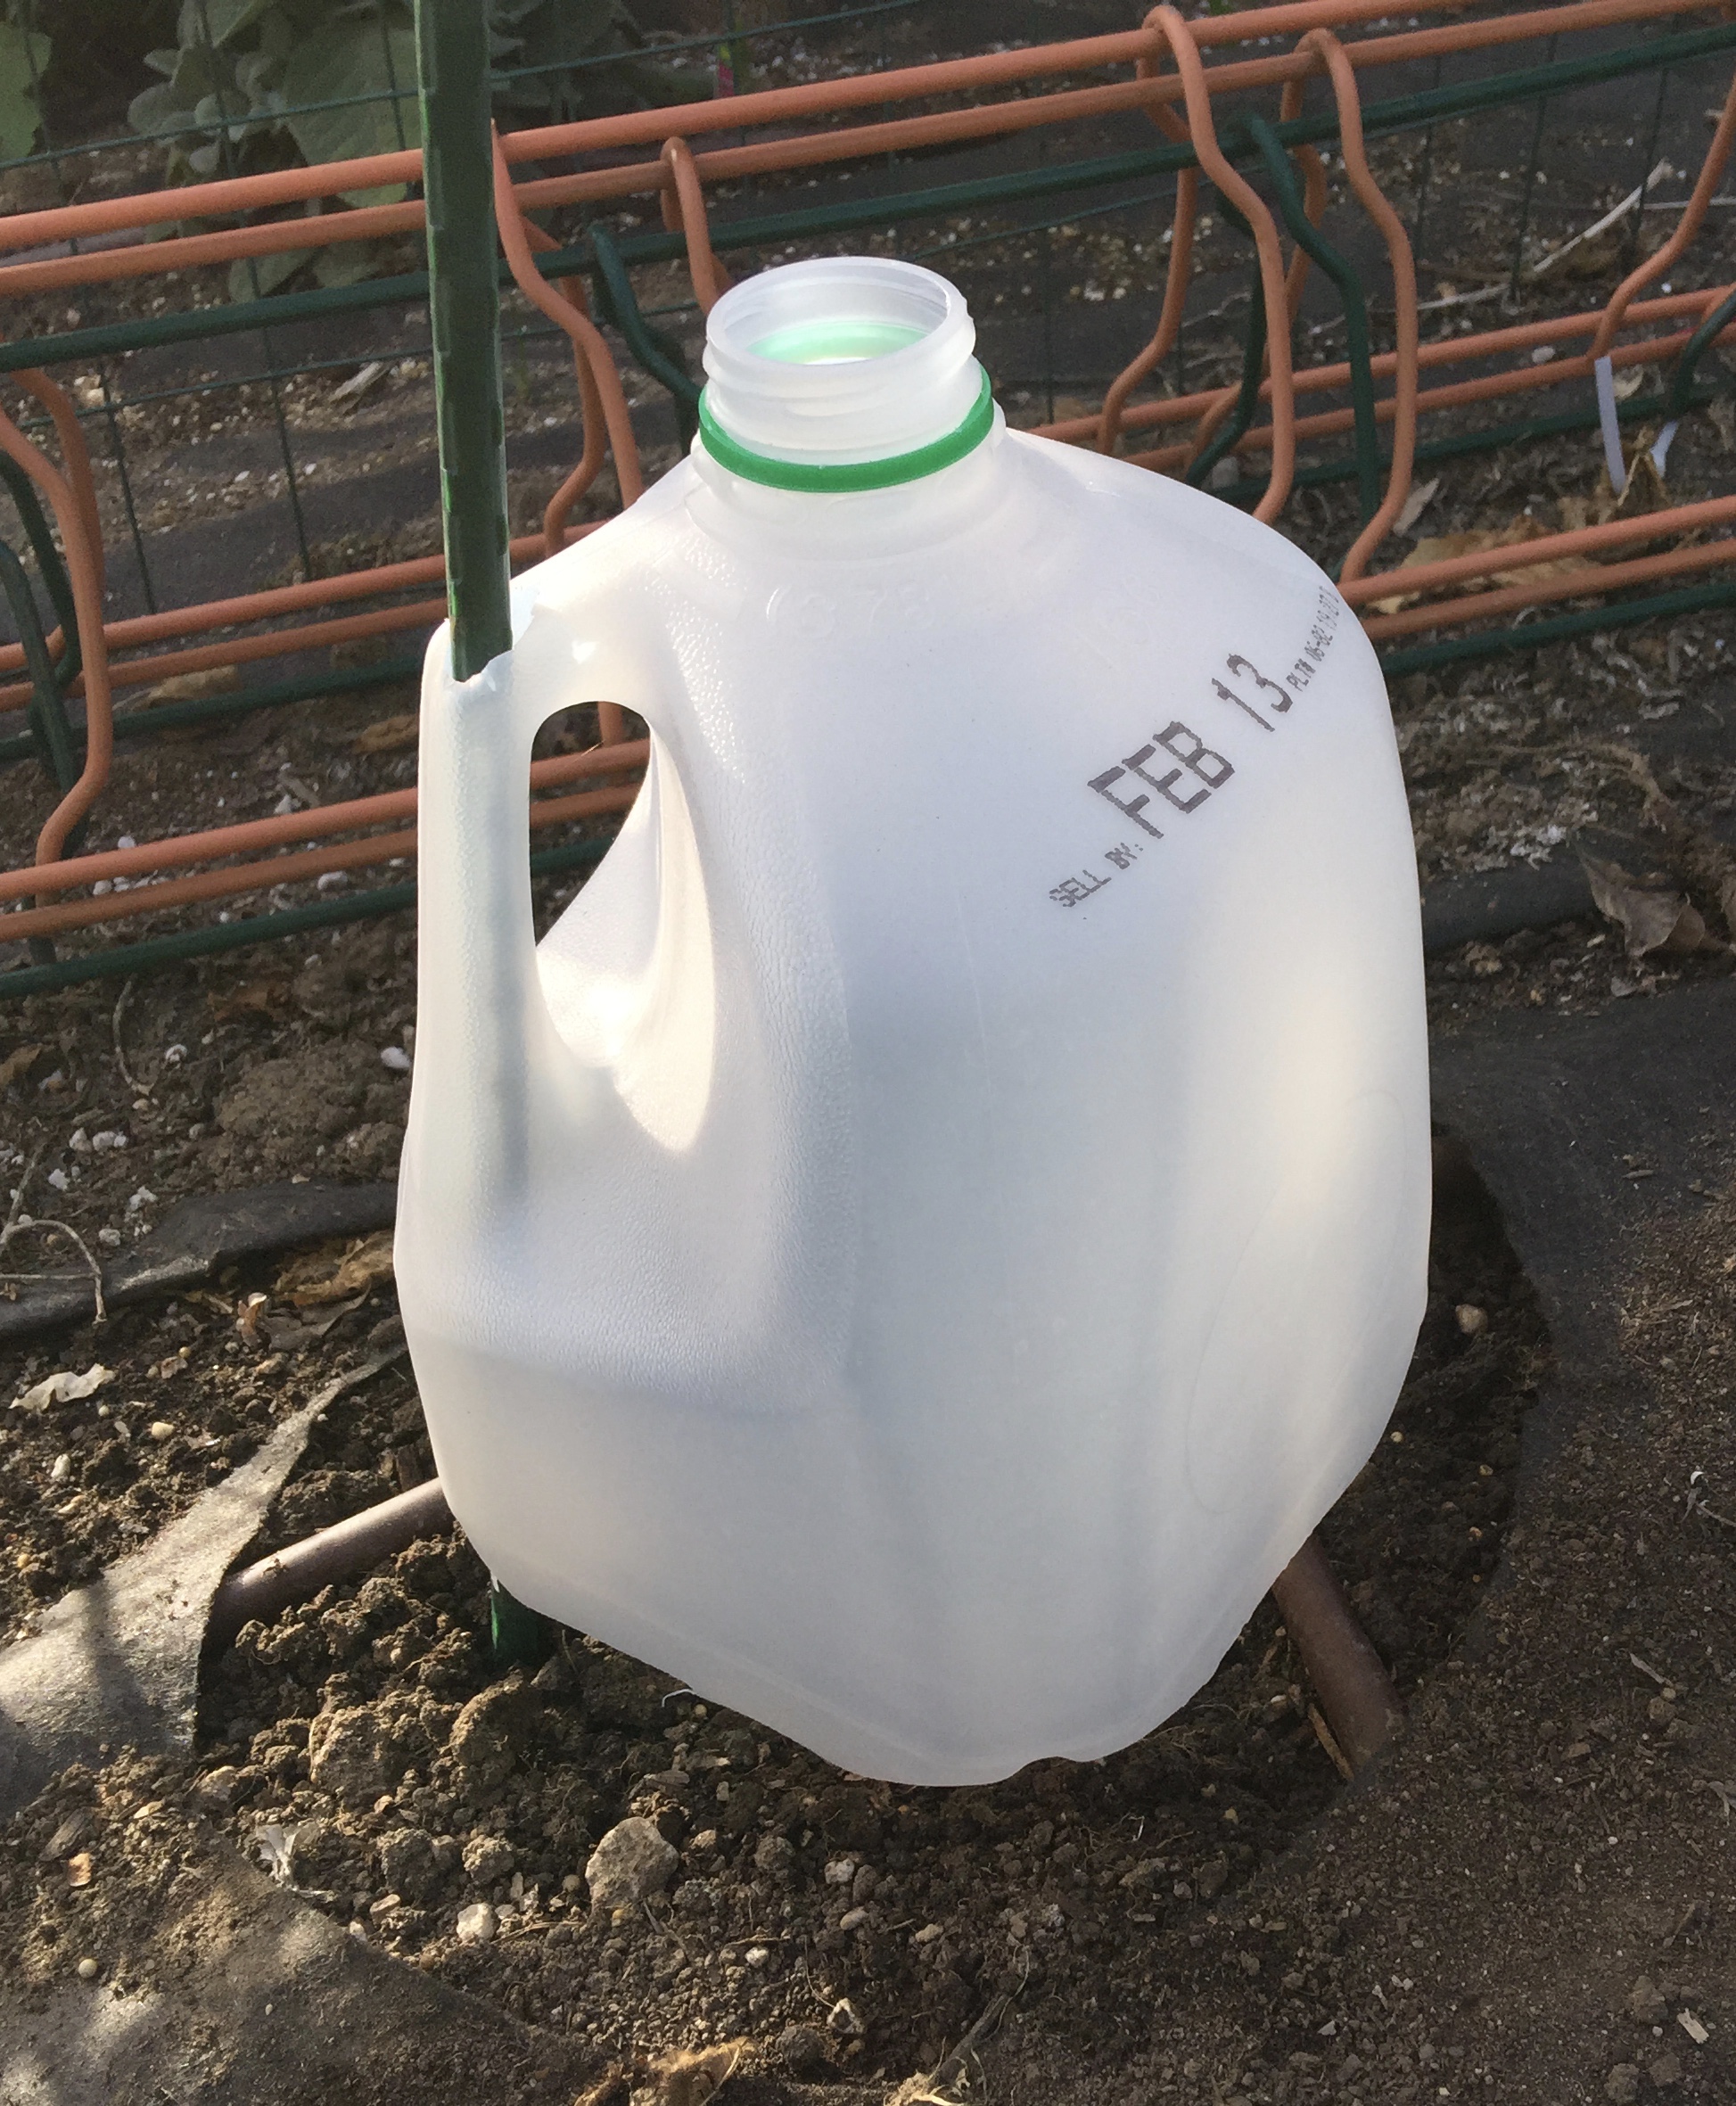 Milk jug greenhouse for protecting young plants